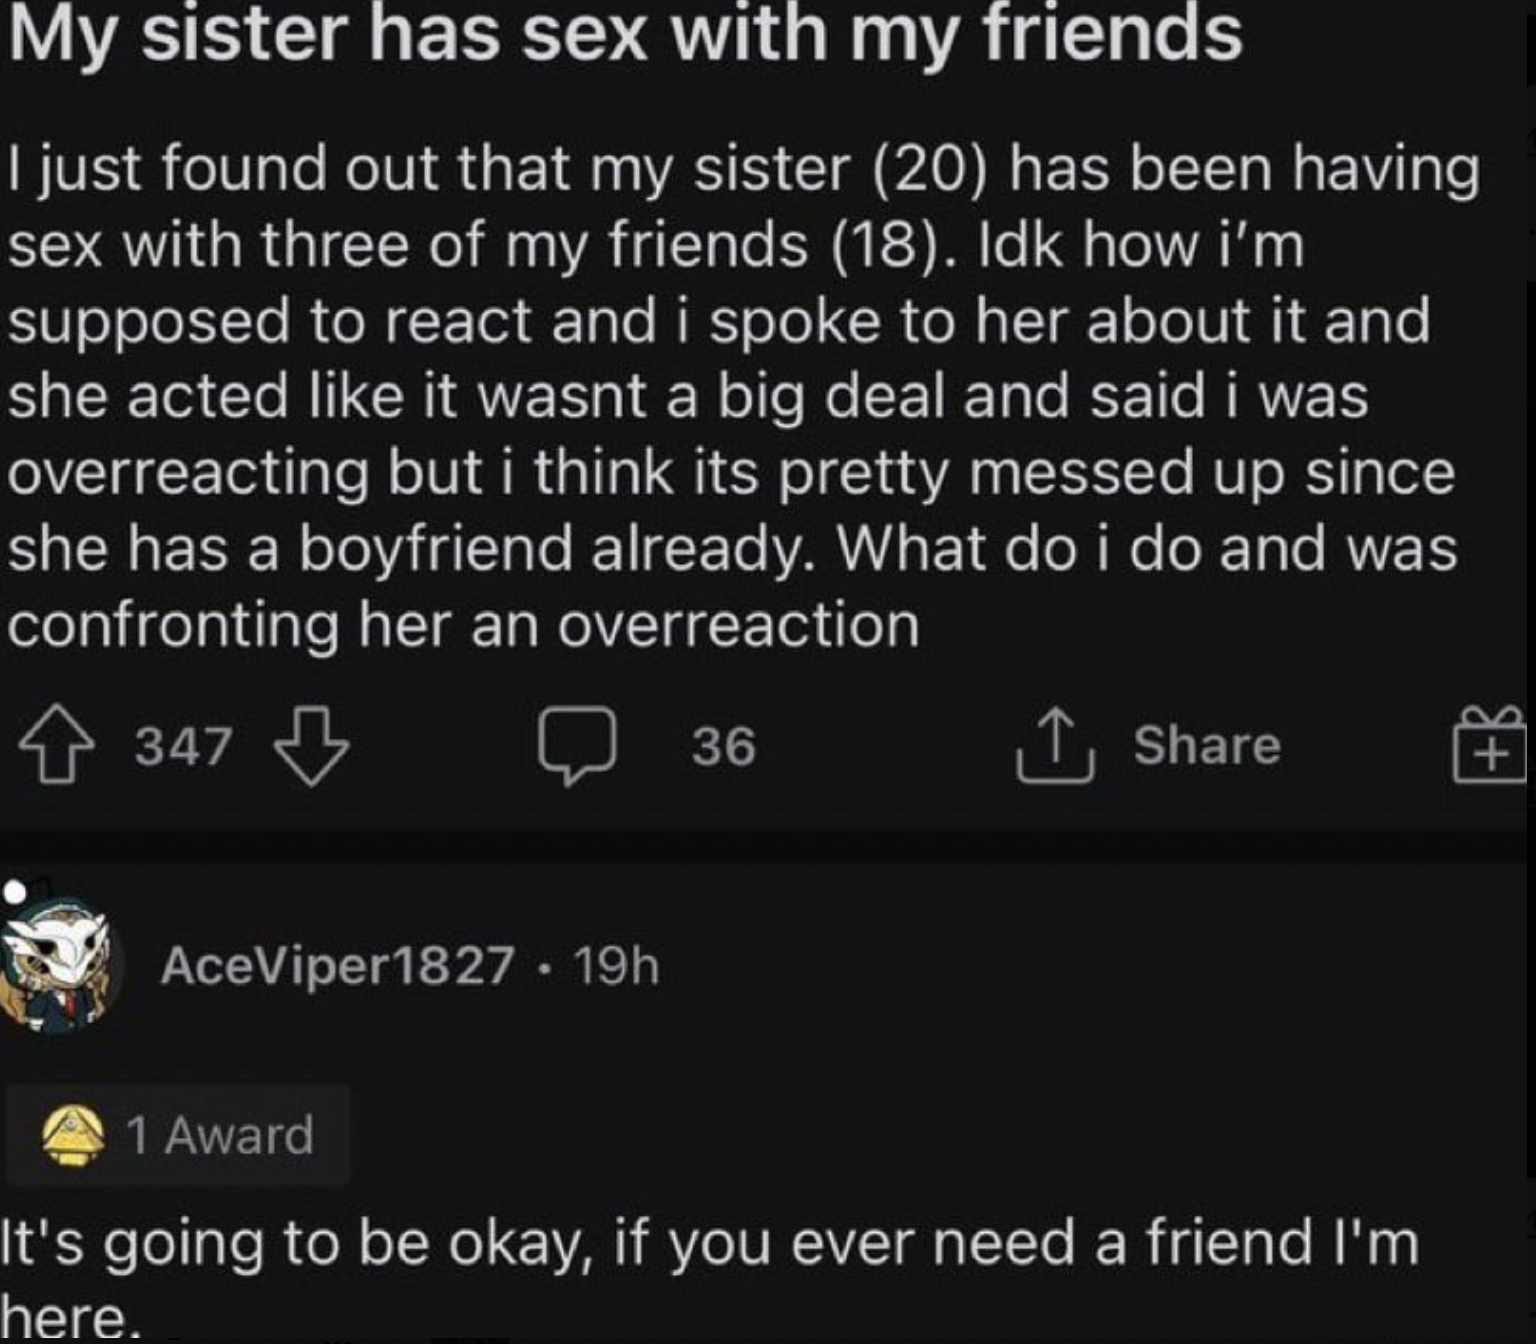 multimedia - My sister has sex with my friends I just found out that my sister 20 has been having sex with three of my friends 18. Idk how i'm supposed to react and i spoke to her about it and she acted it wasnt a big deal and said i was overreacting but 